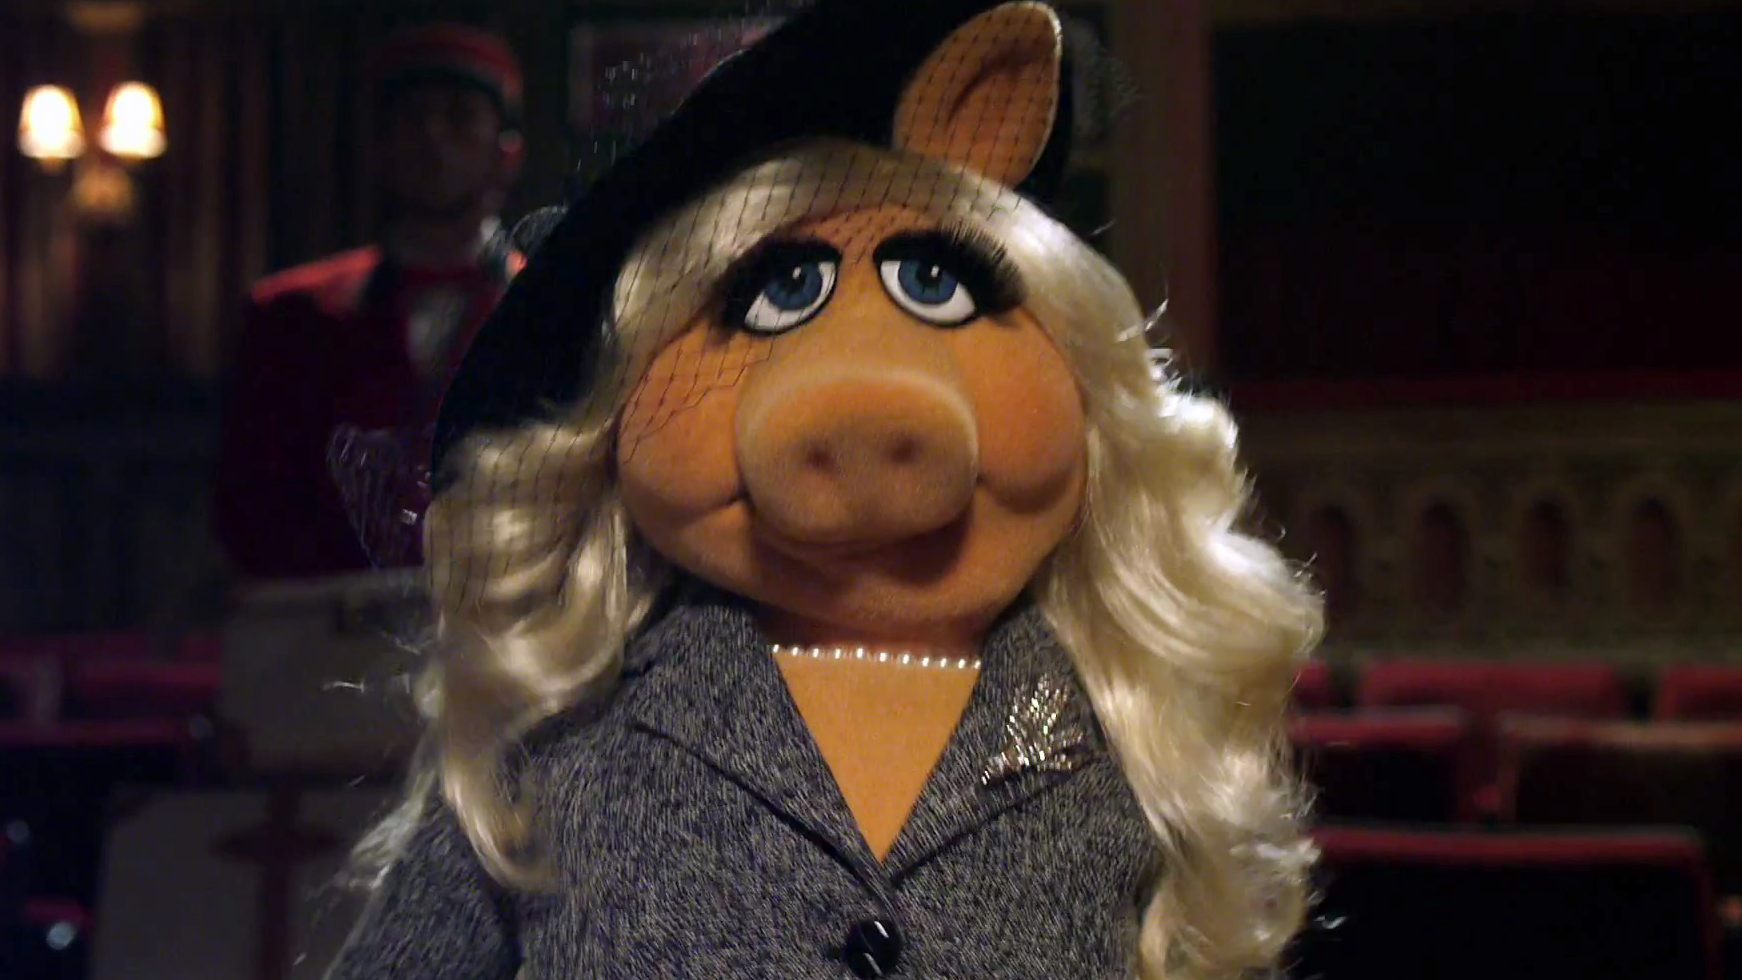 Miss Piggy May Be Cancelled Next, Here's Why